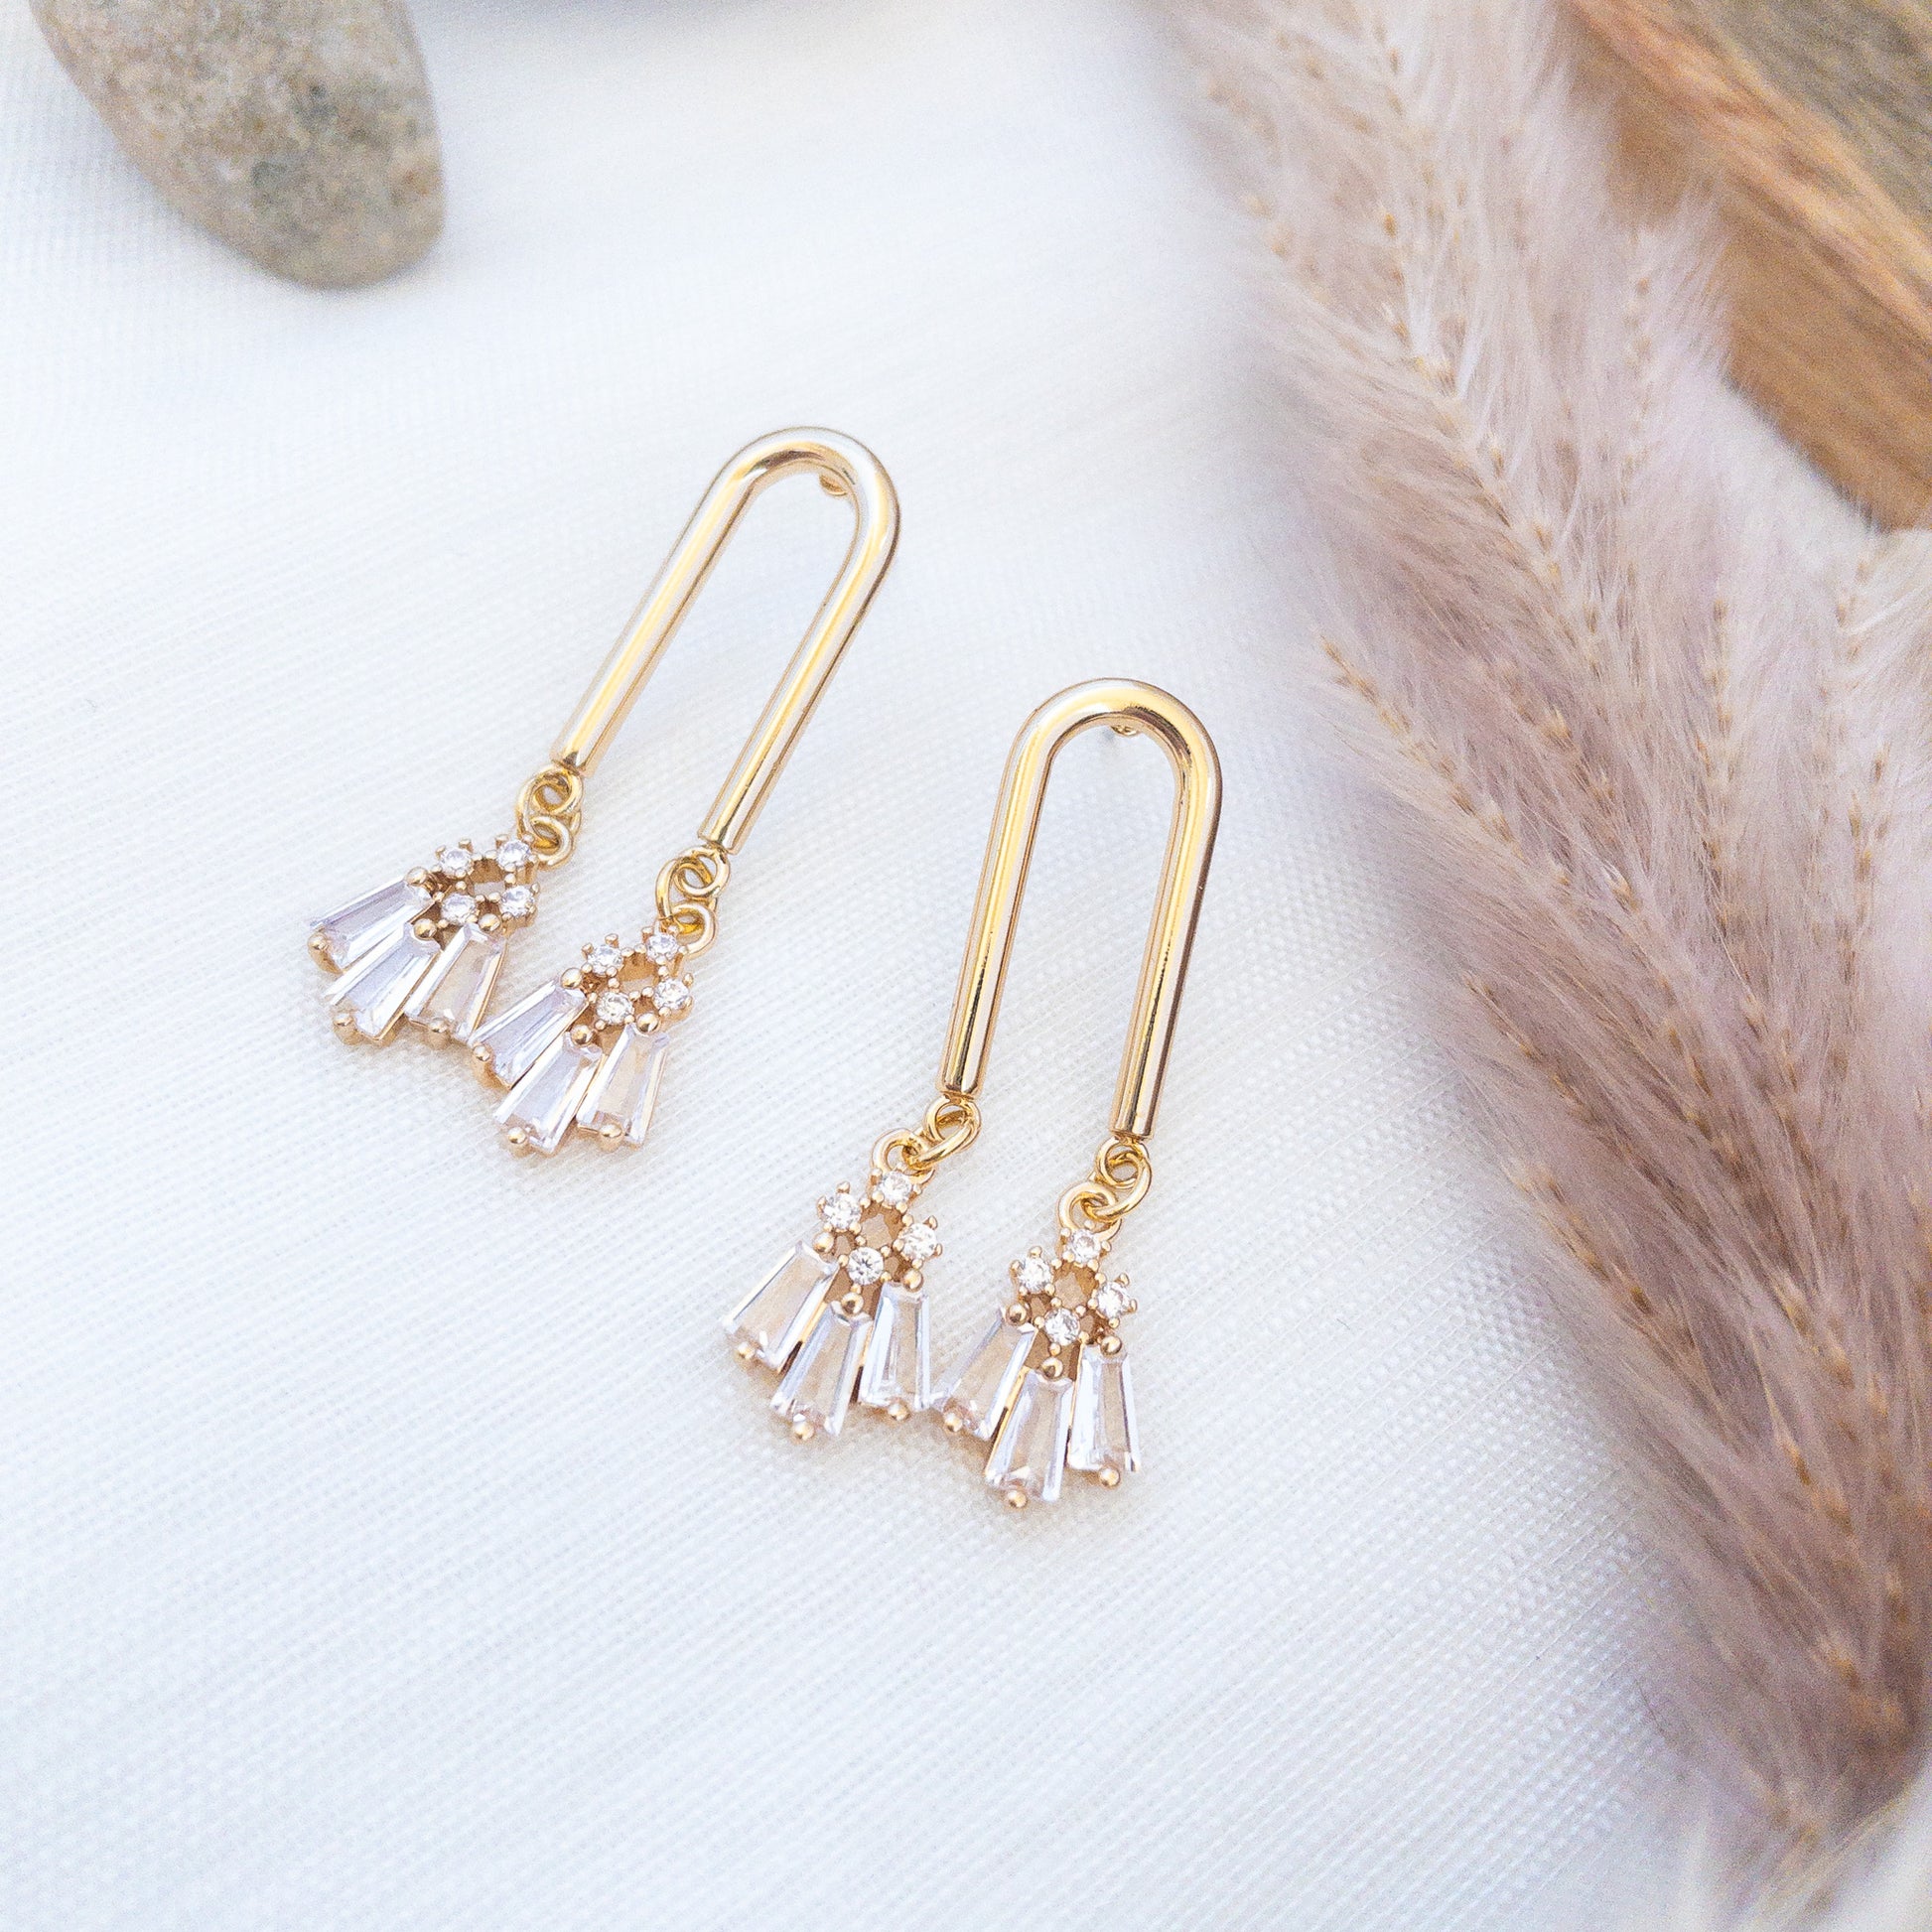 Unique Gold geometric earrings laying on a white surface